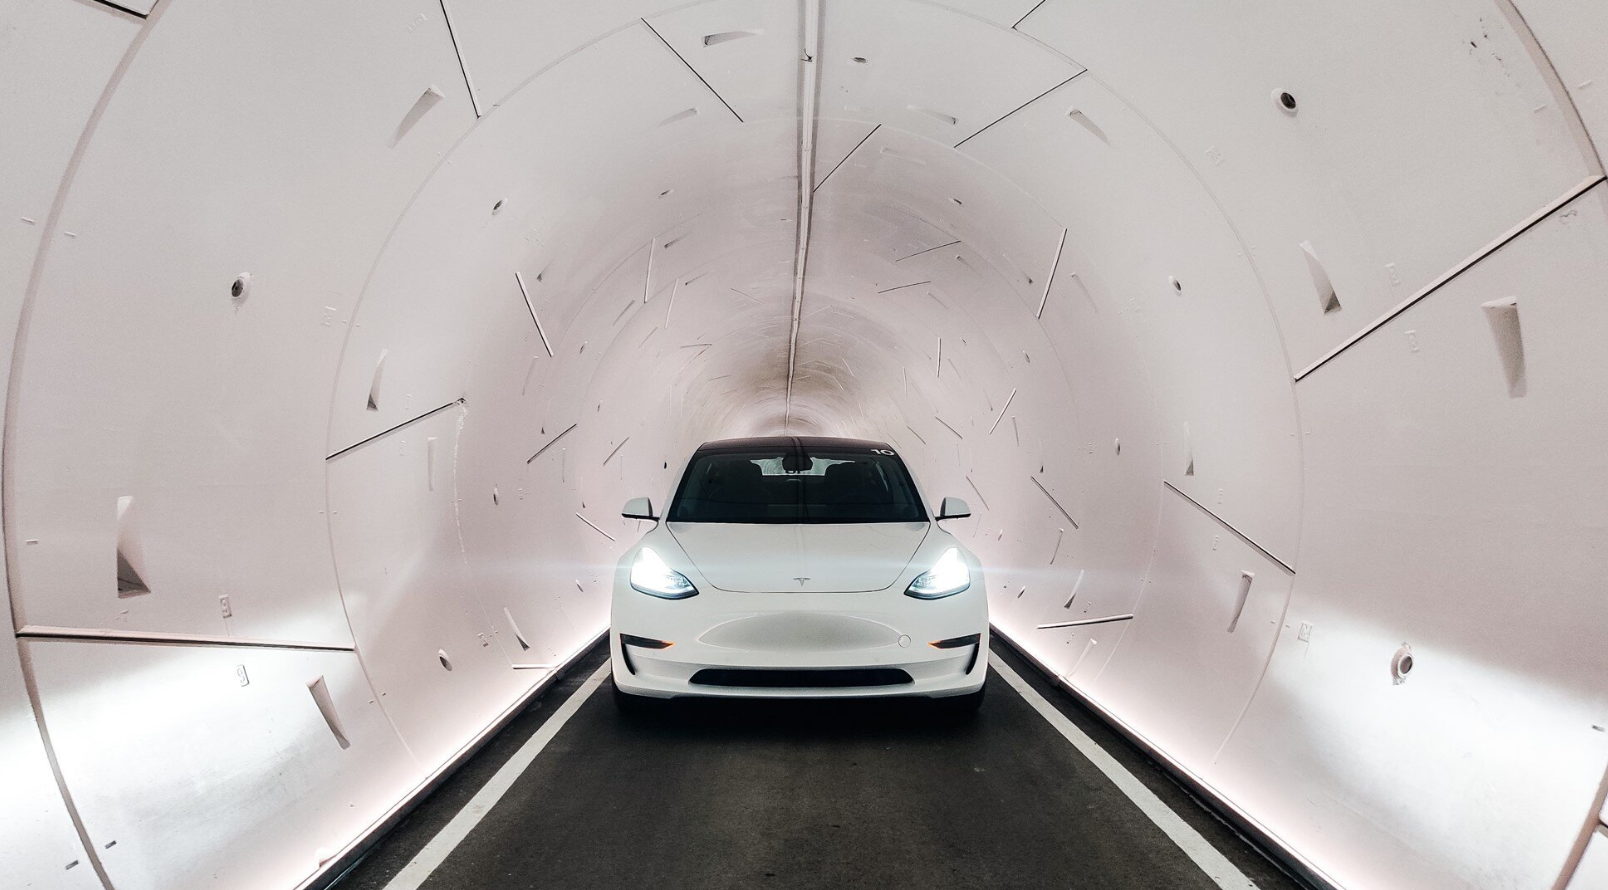 tesla master plan 3 may mention a partnership with The Boring Company